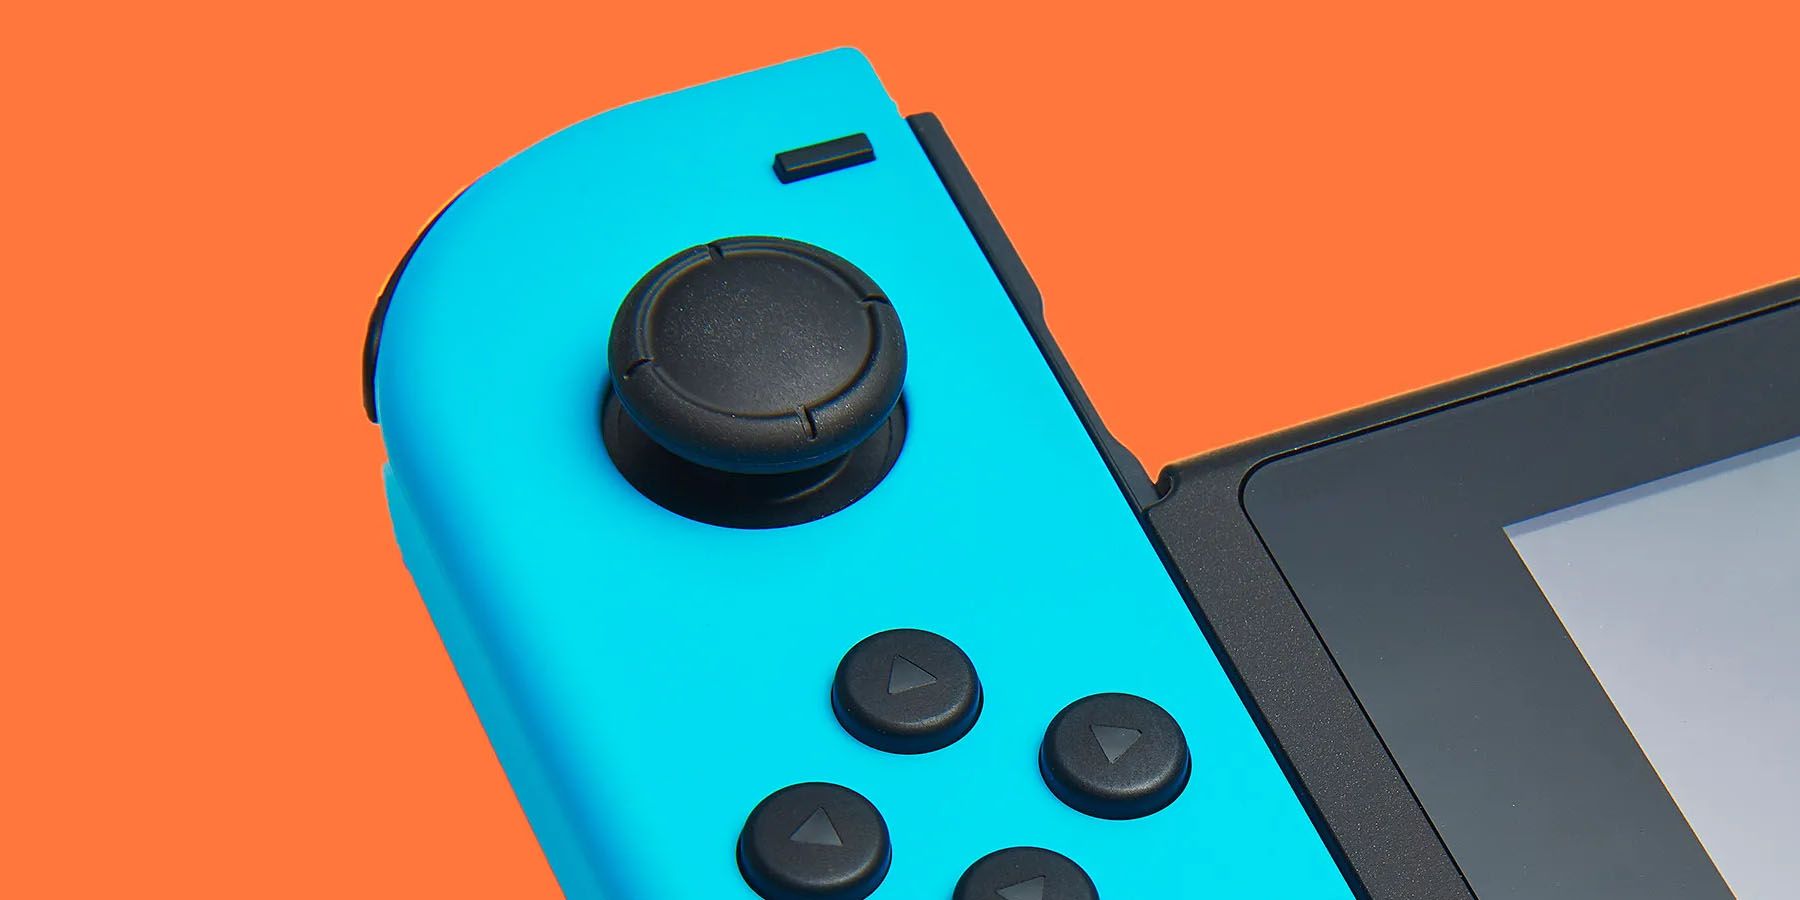 Rumor: Nintendo Switch 2 Could Have Magnetic Joy-Cons